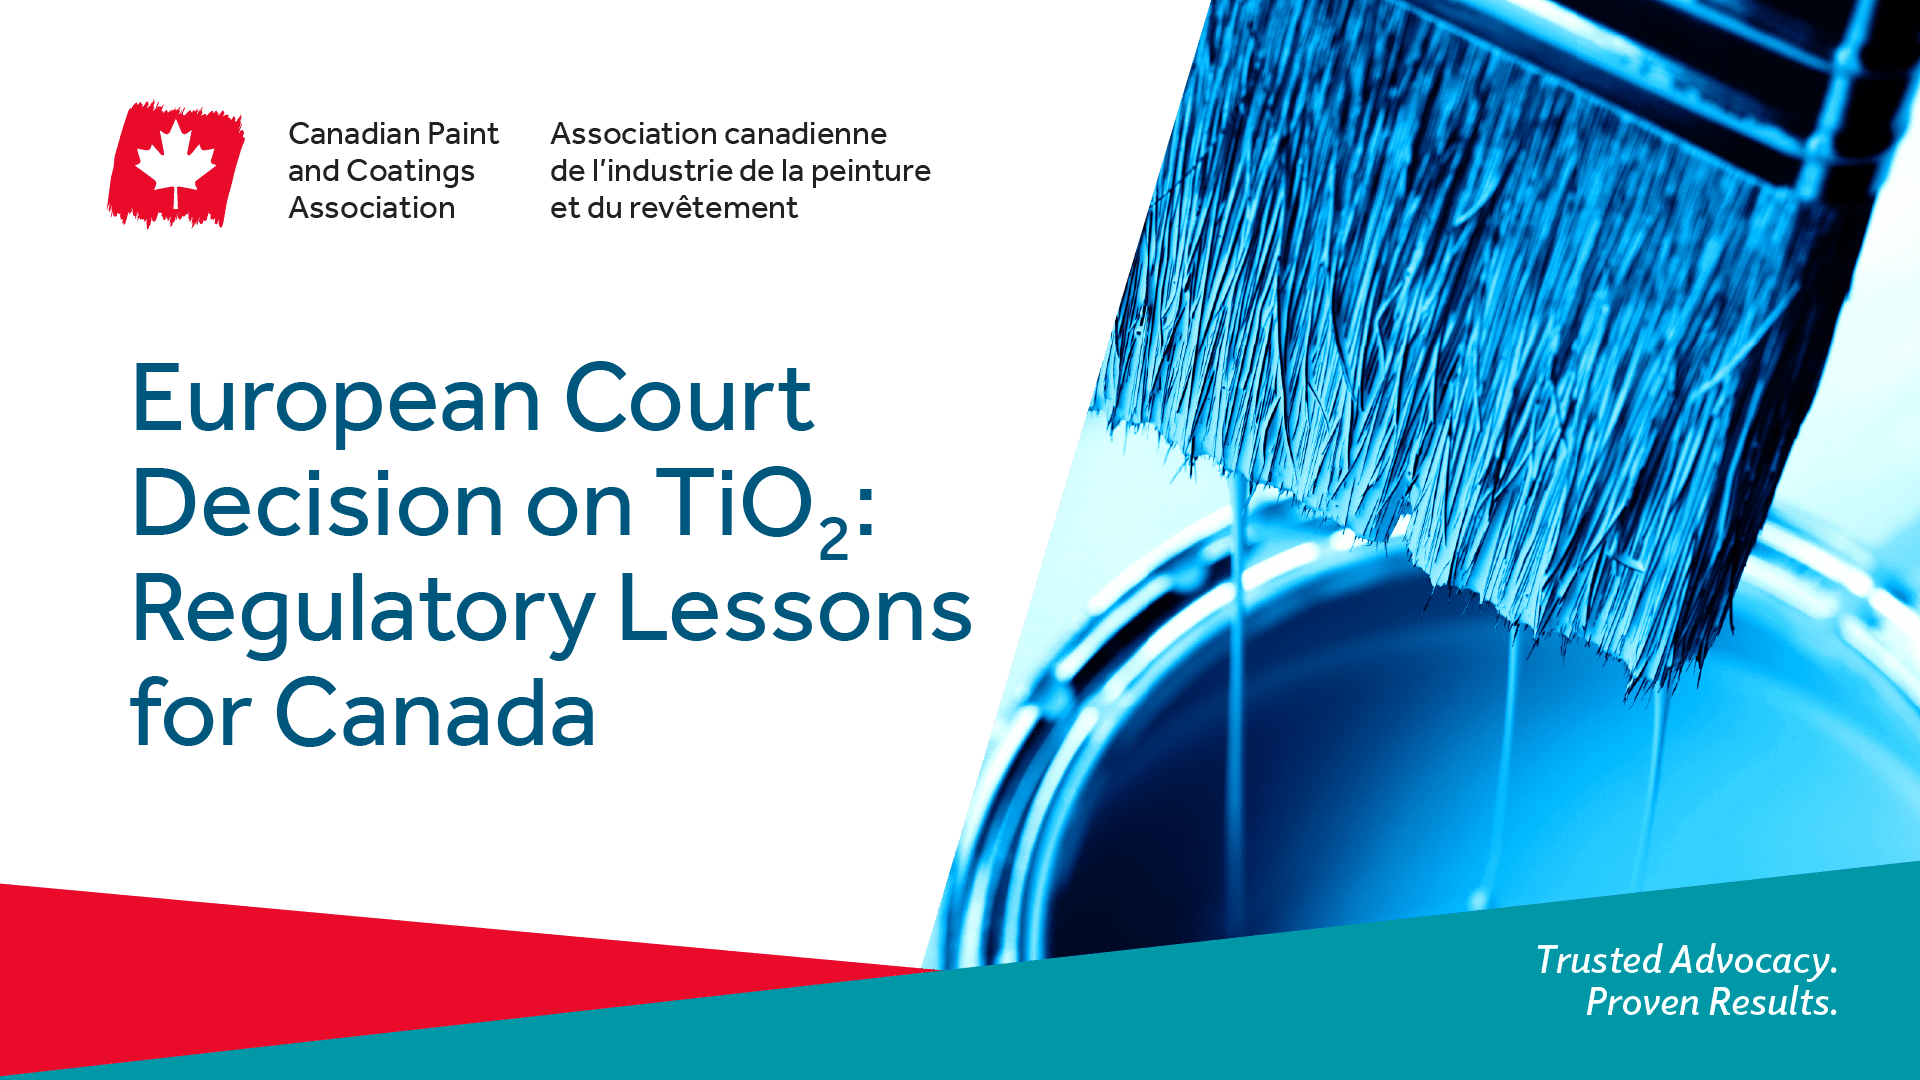 European Court Decision on TiO2: Regulatory Lessons for Canada